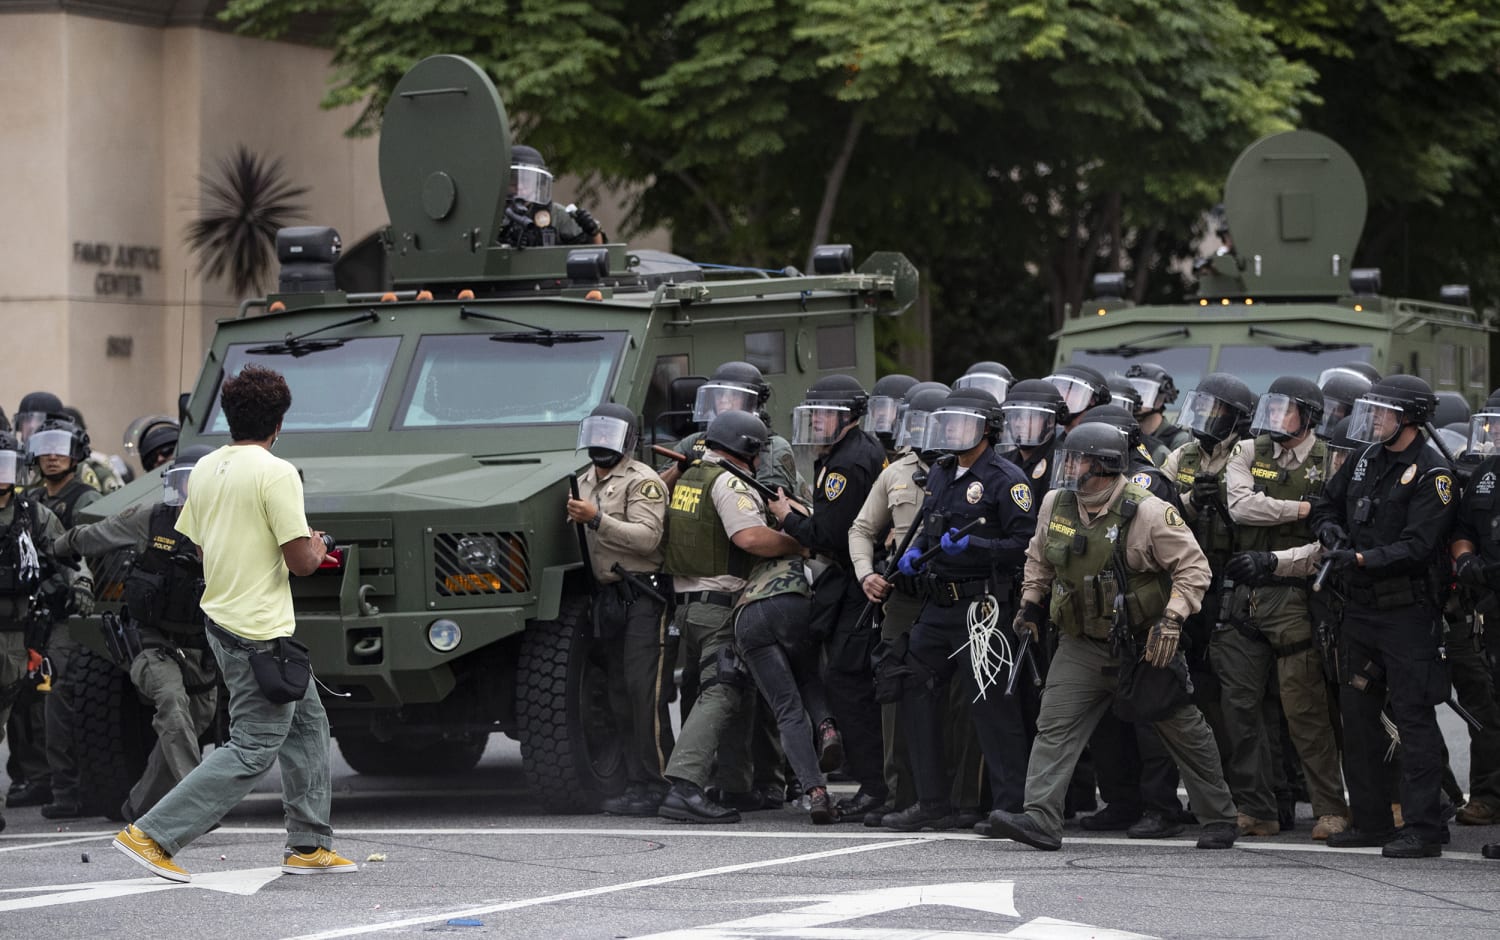 Senate Rejects Strict Limits On Military Gear For Civilian Police